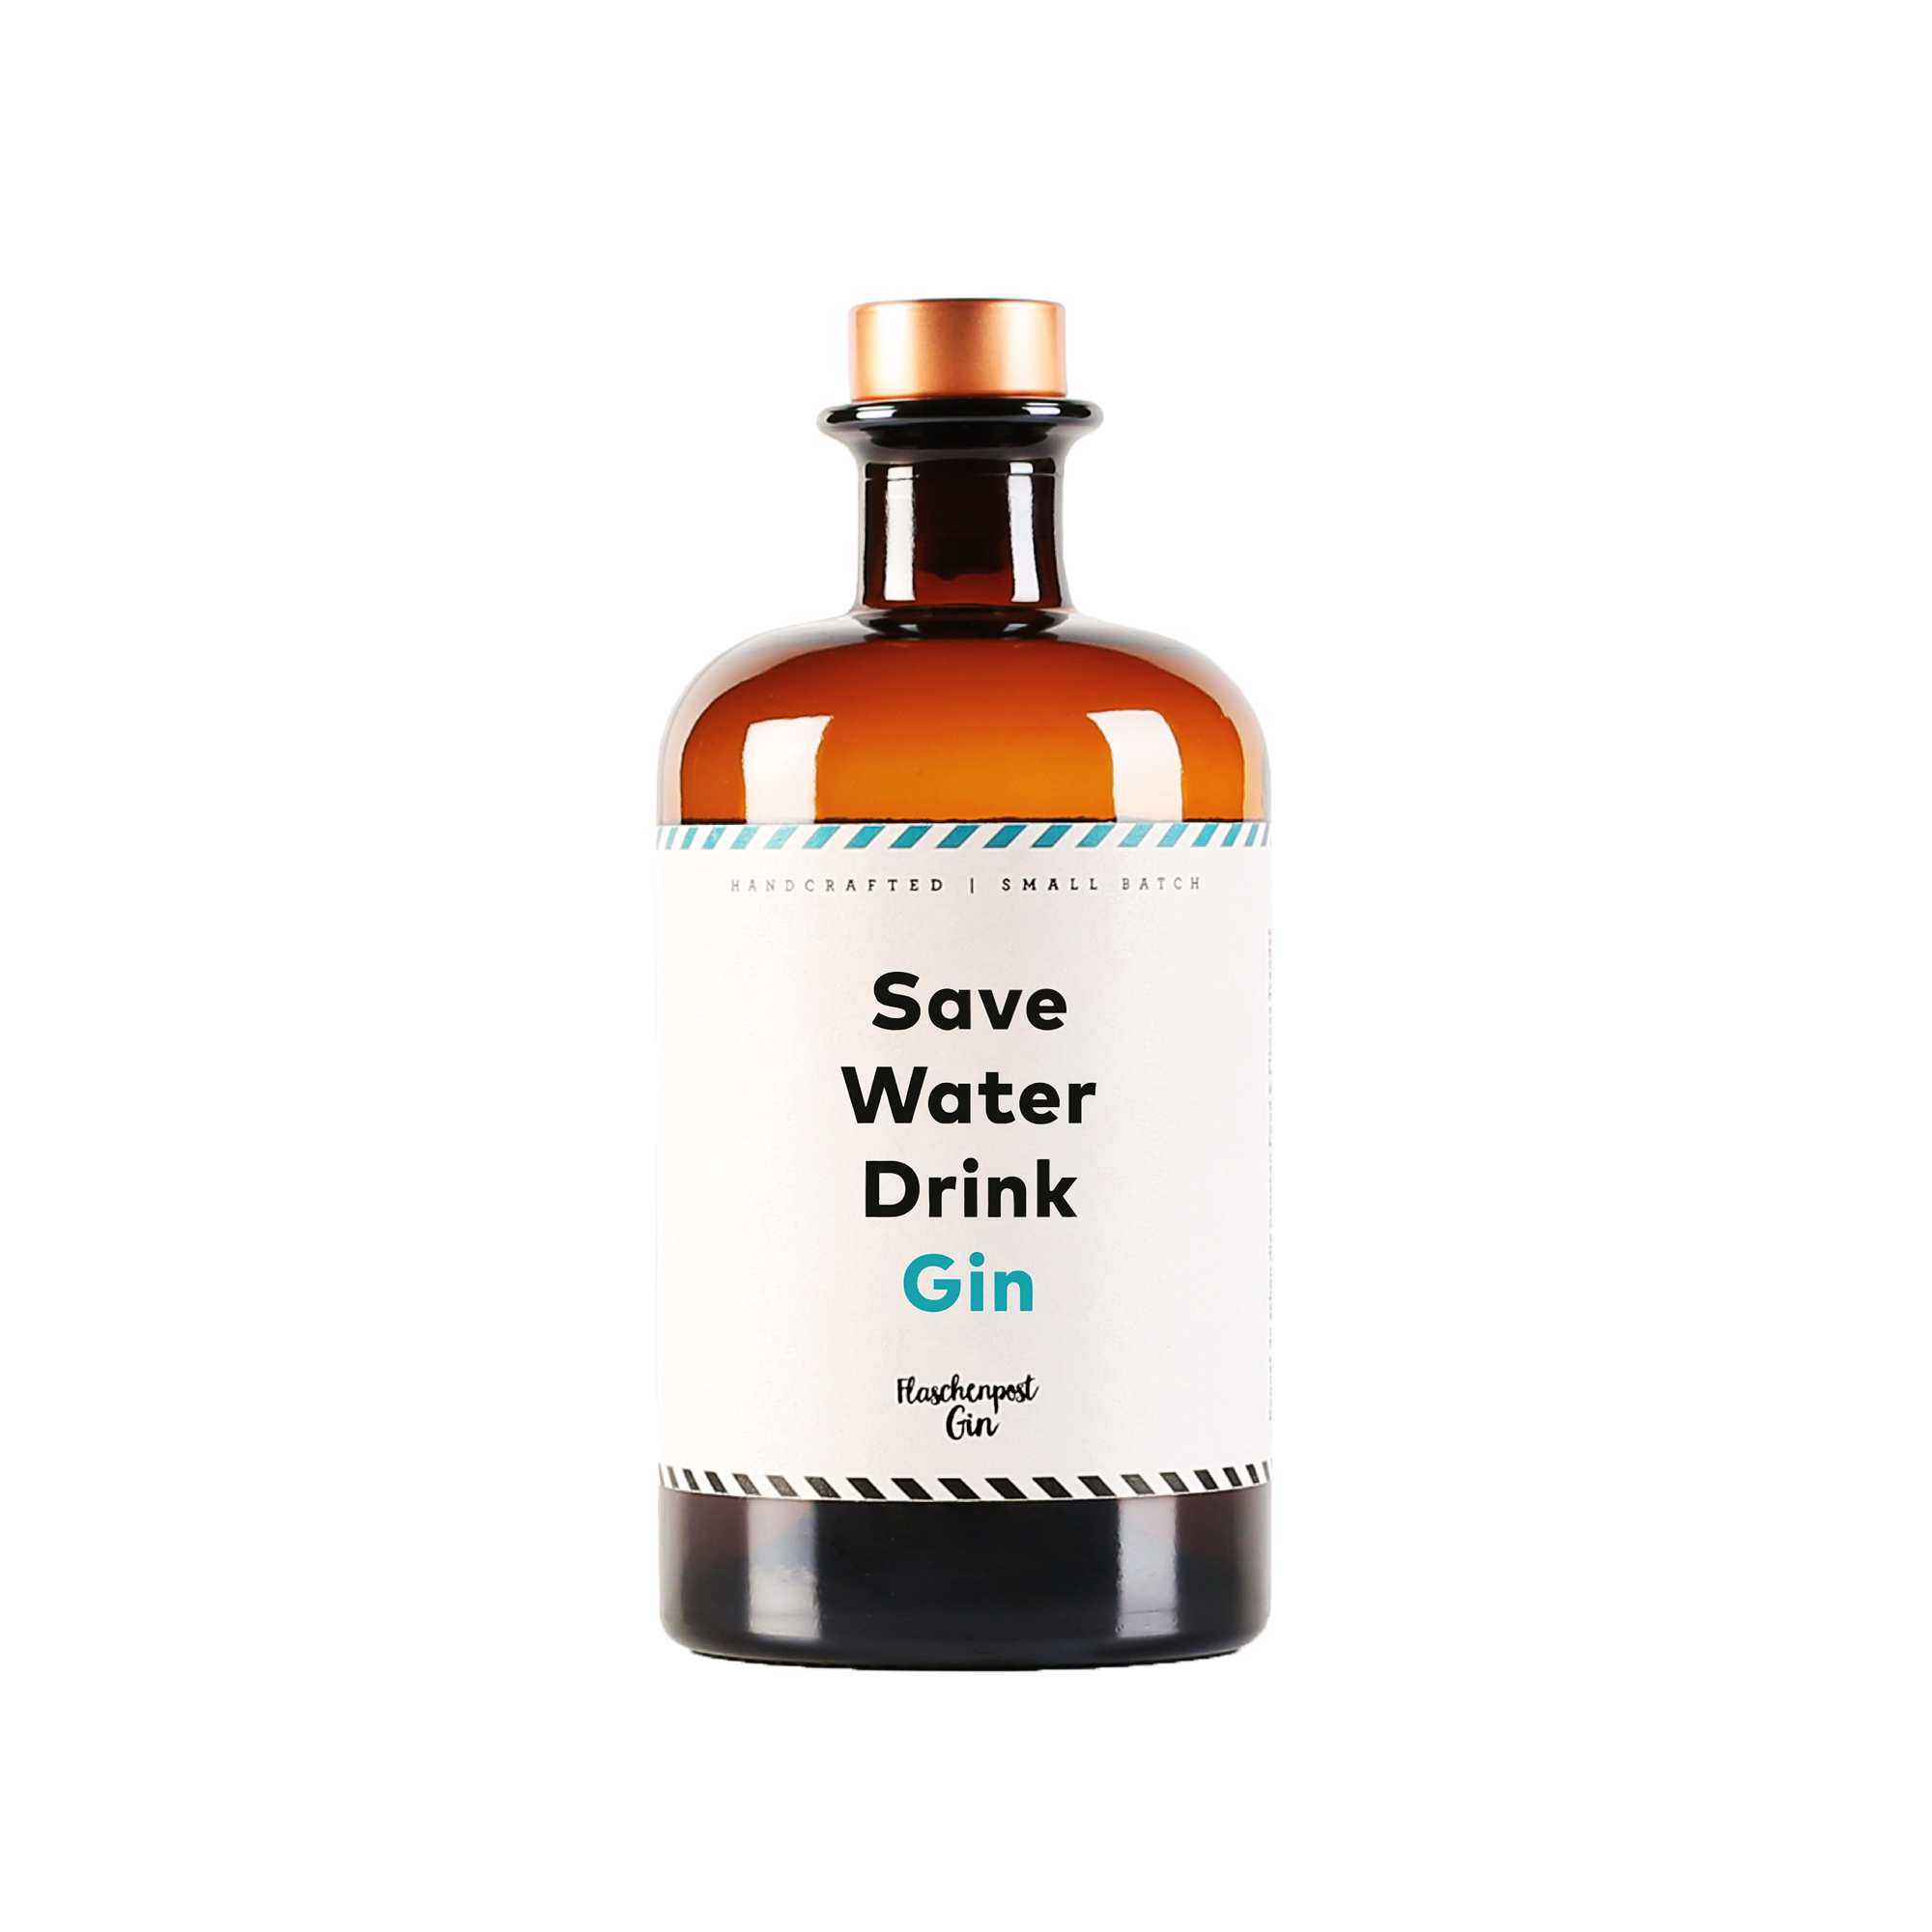 Save Water Drink Gin